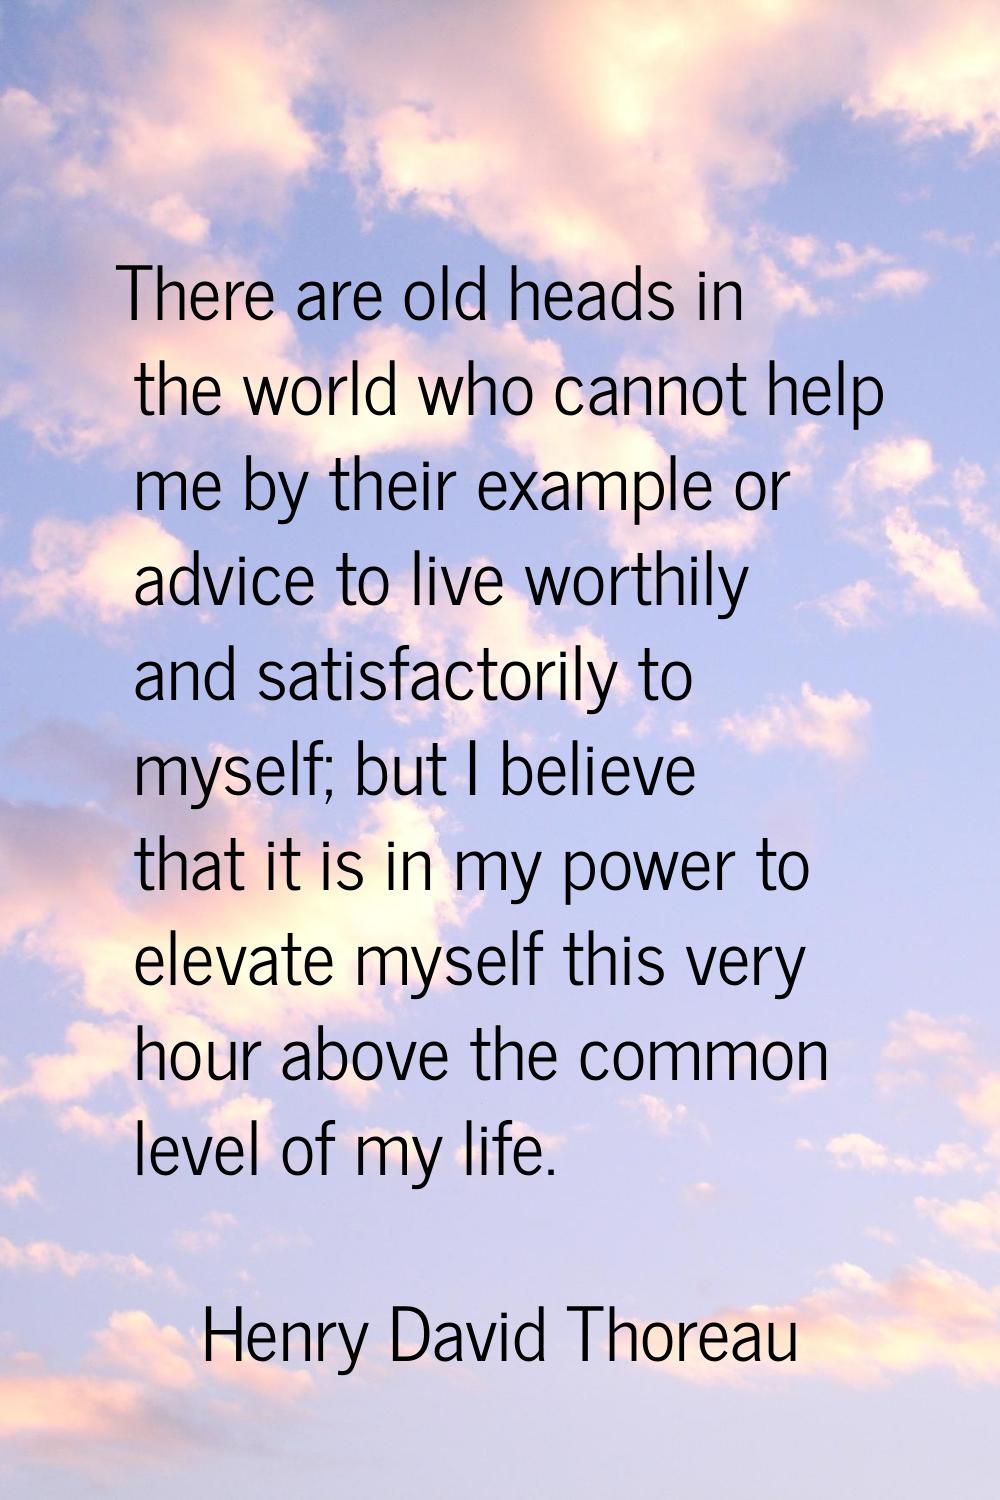 There are old heads in the world who cannot help me by their example or advice to live worthily and